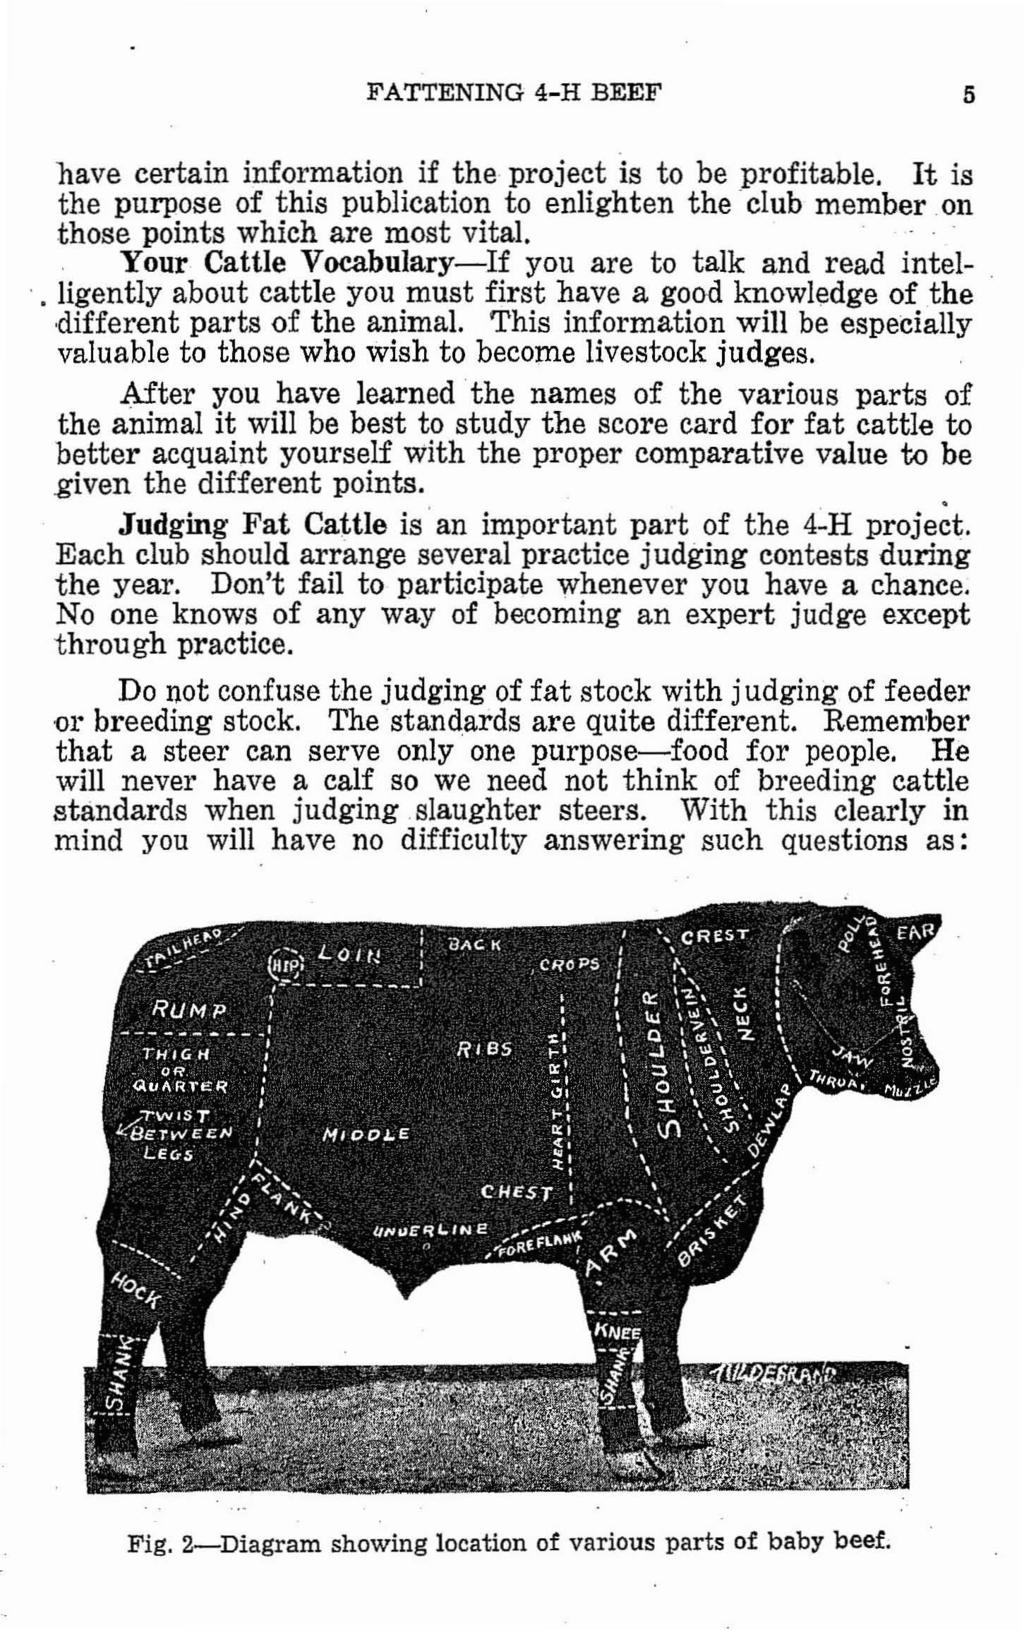 FATTENING 4-H BEEF 5 nave certain information if the project is to be profitable. It is the purpose of this publication to enlighten the club member.on those points which are most vital.